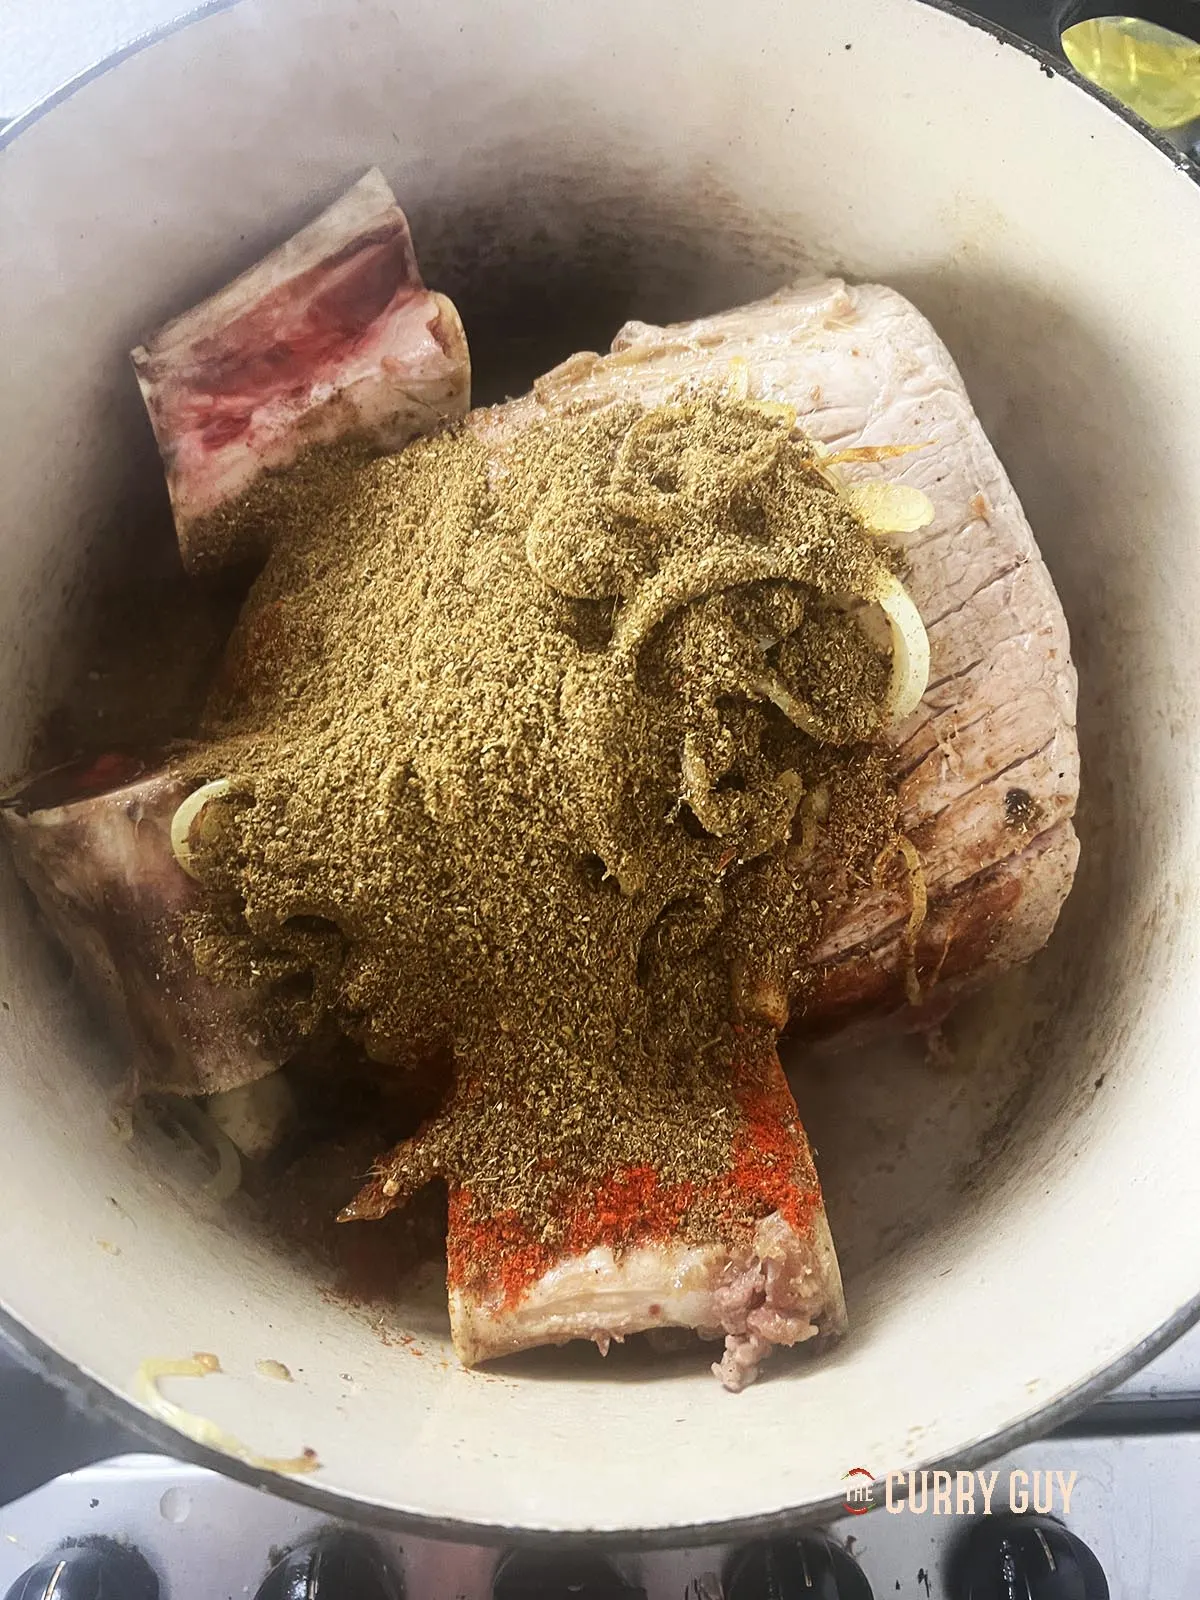 Adding the fried onions, garlic and marrow bones to the pot.